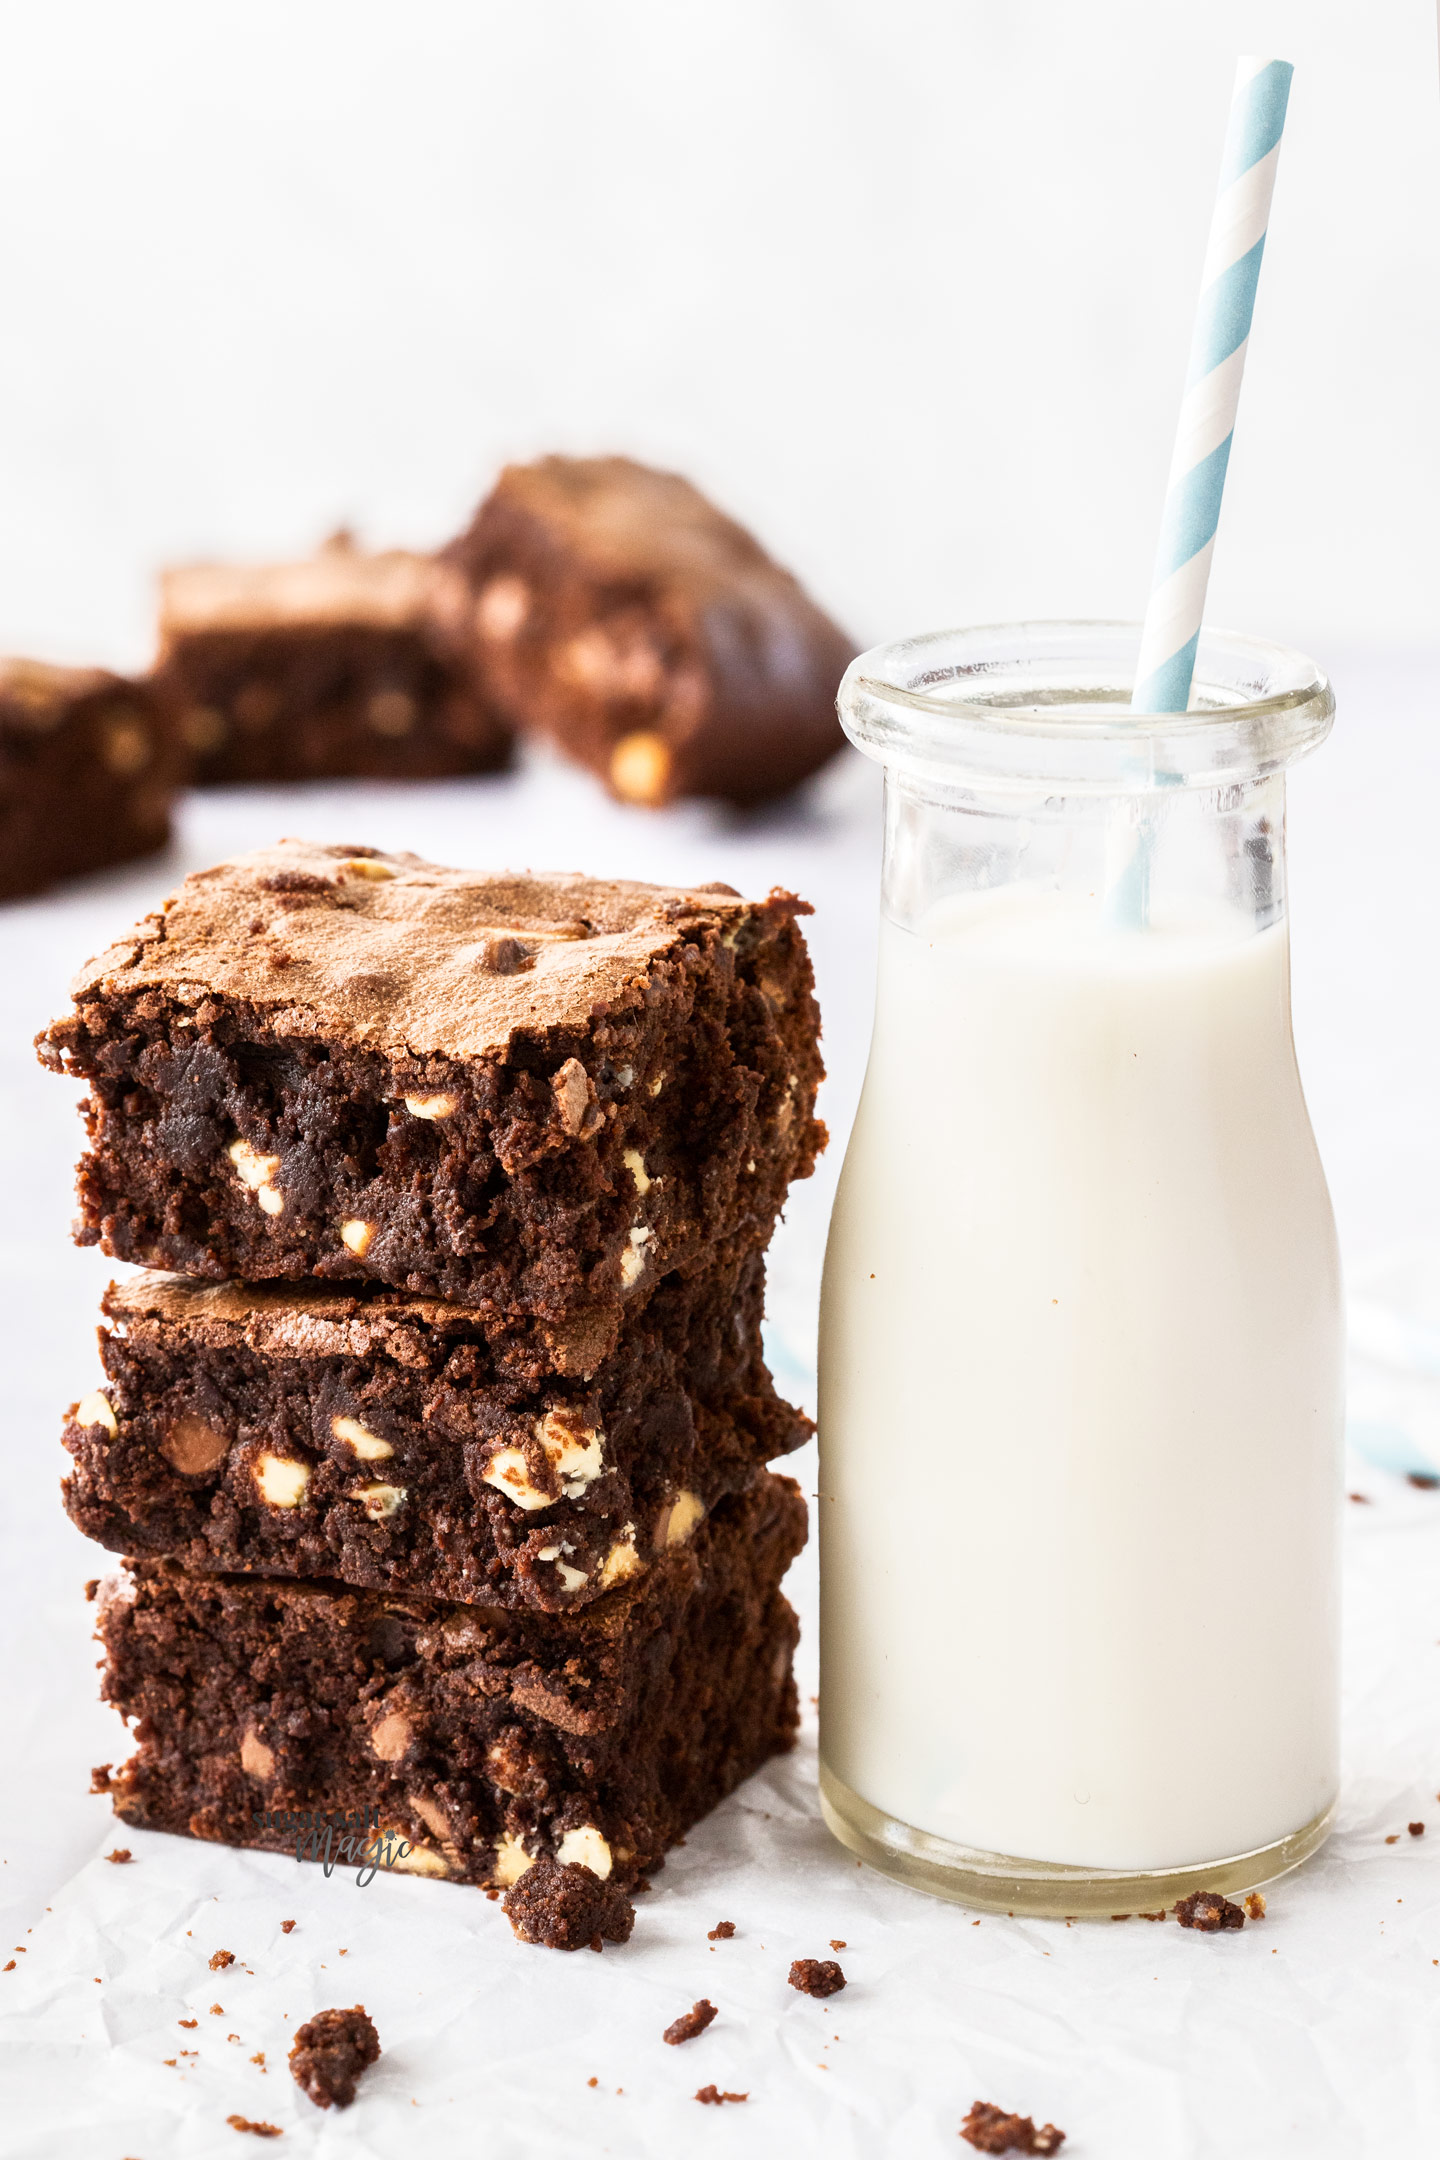 A stack of 3 brownies next to a small bottle of milk.